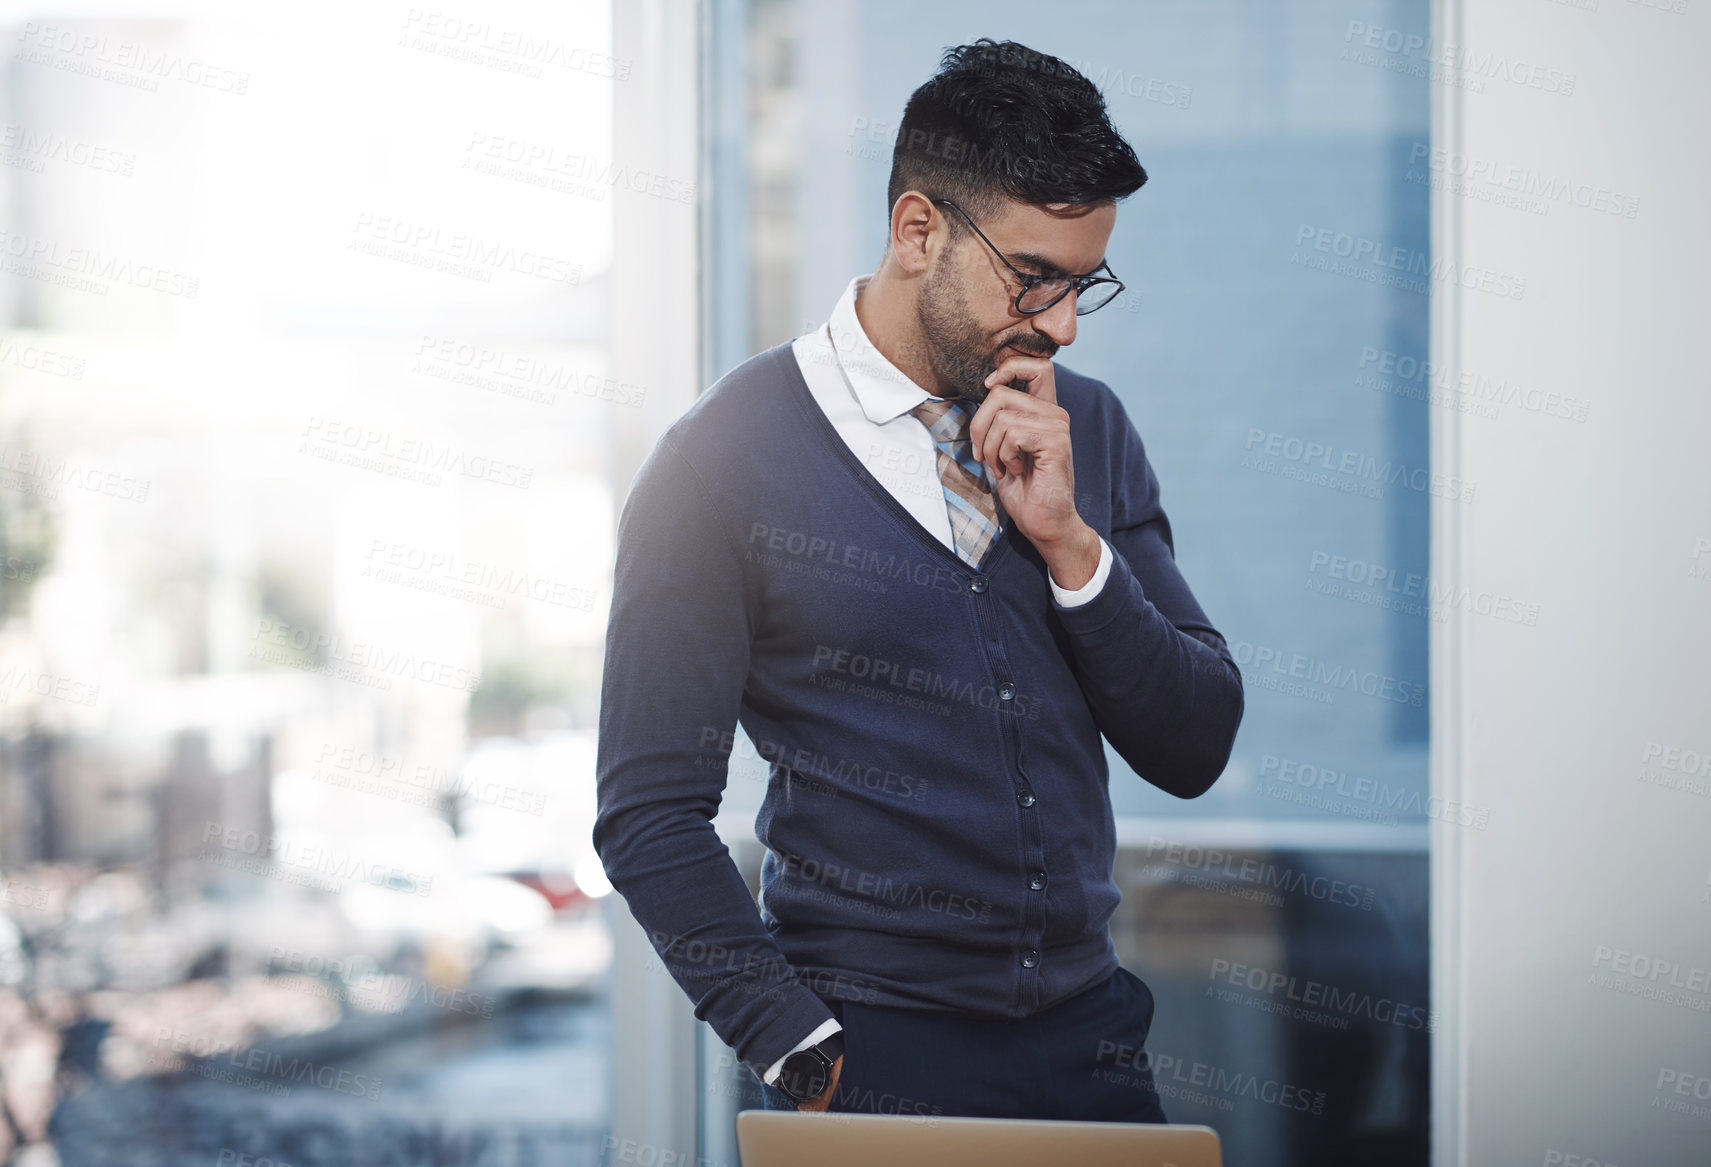 Buy stock photo Shot of a young businessman looking thoughtful in an office